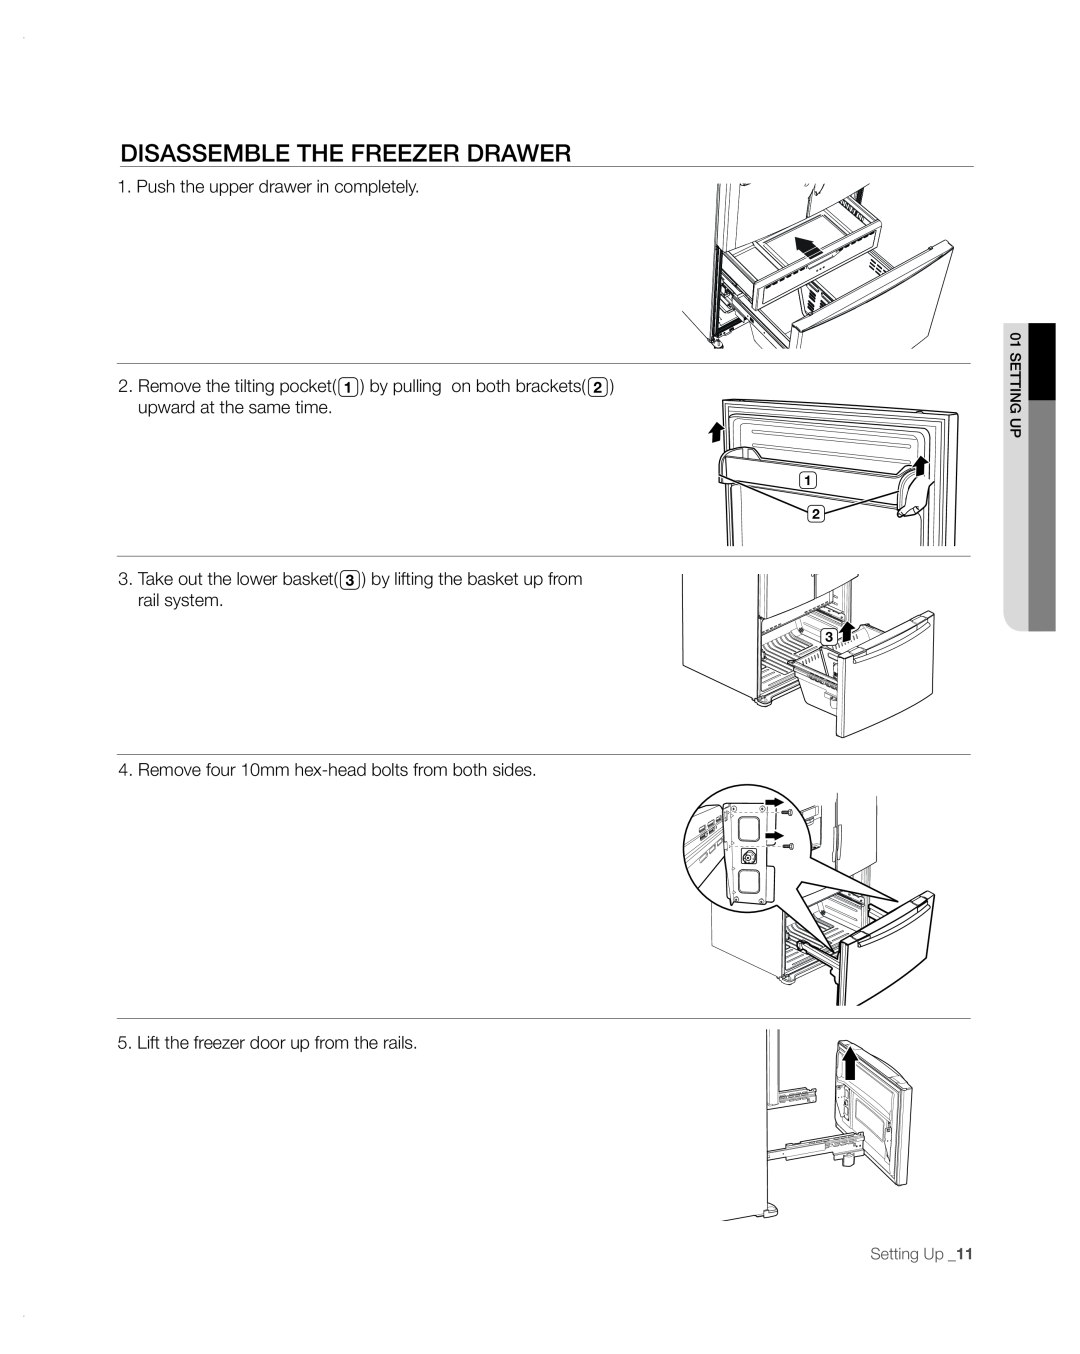 Samsung RFG297AA user manual disassemble the freezer drawer, Push the upper drawer in completely, Setting Up 